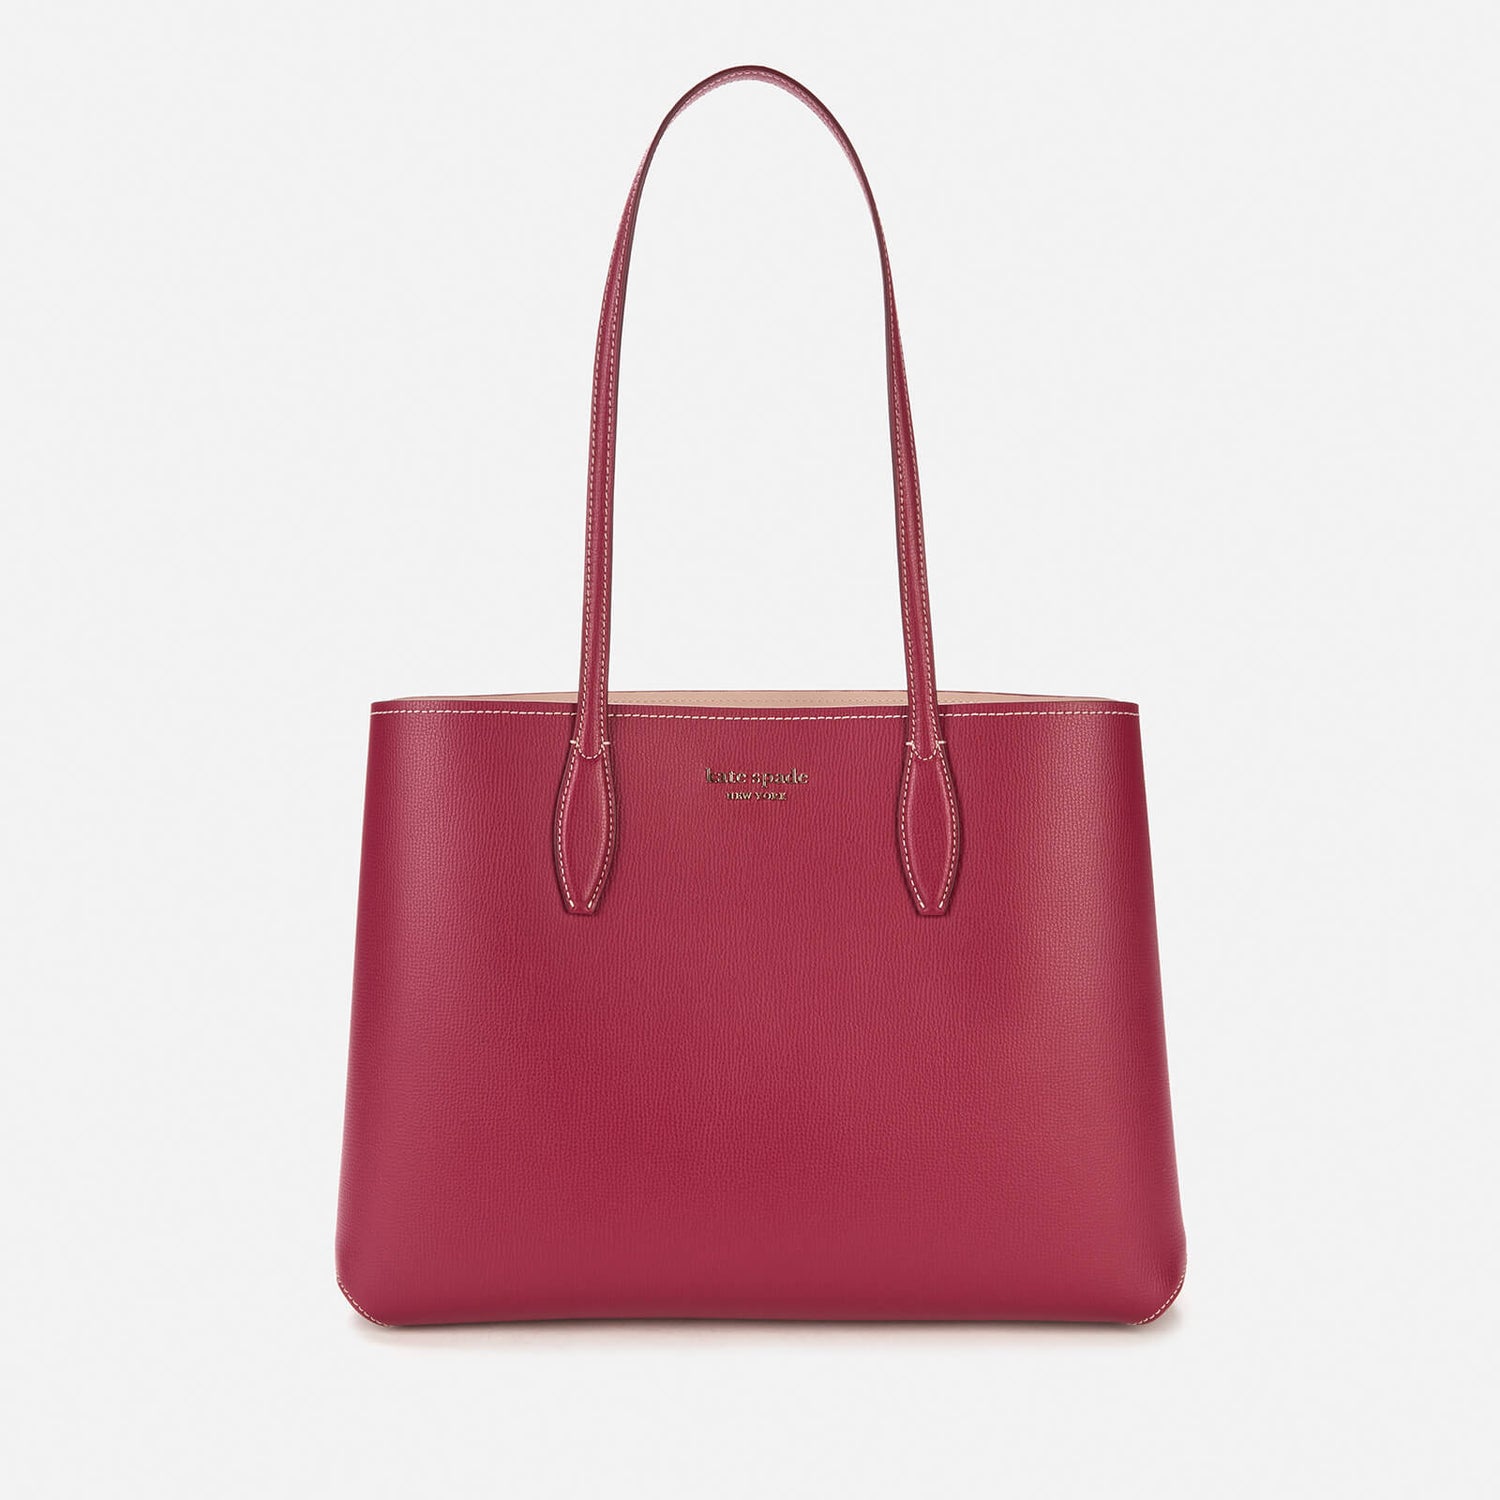 Kate Spade New York Women's All Day Large Tote Bag - Deep Raspberry